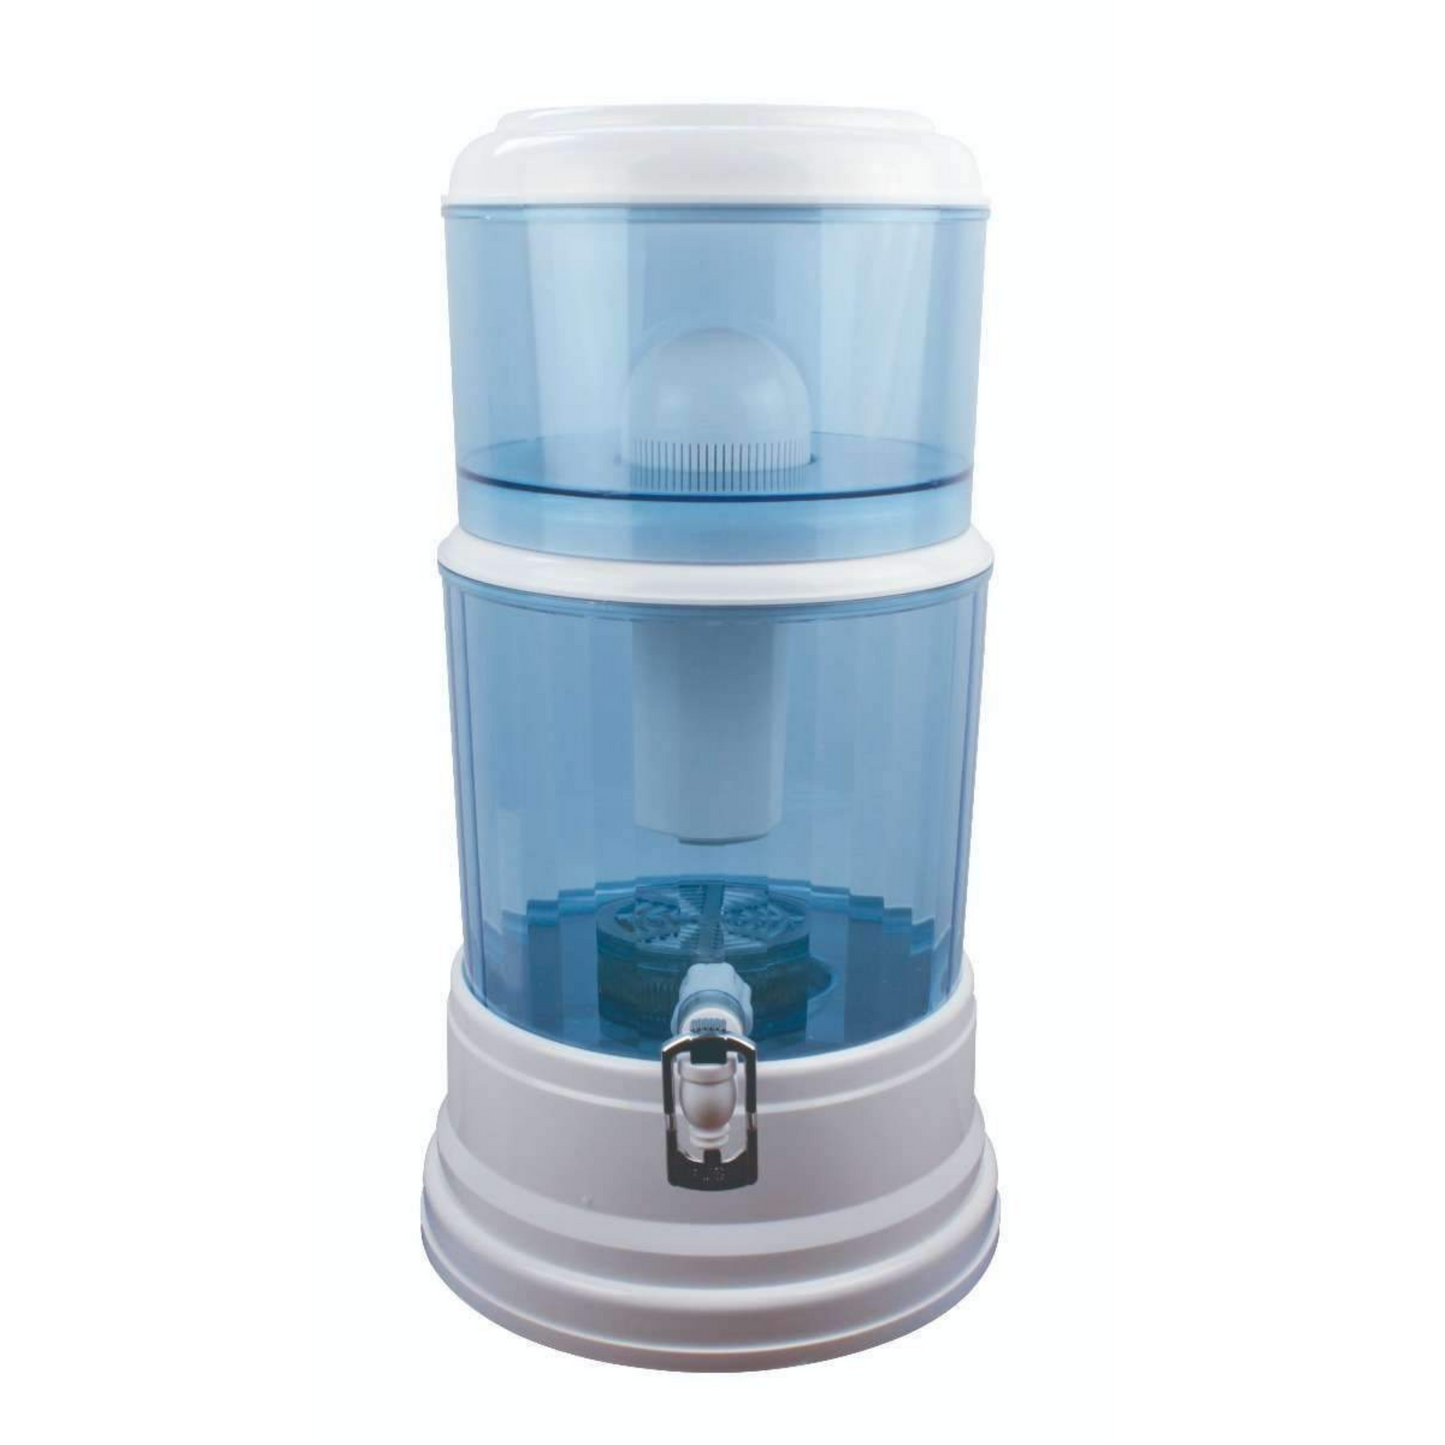 20L Water Dispenser Benchtop Purifier With 3 White Filters & Maifan Stone